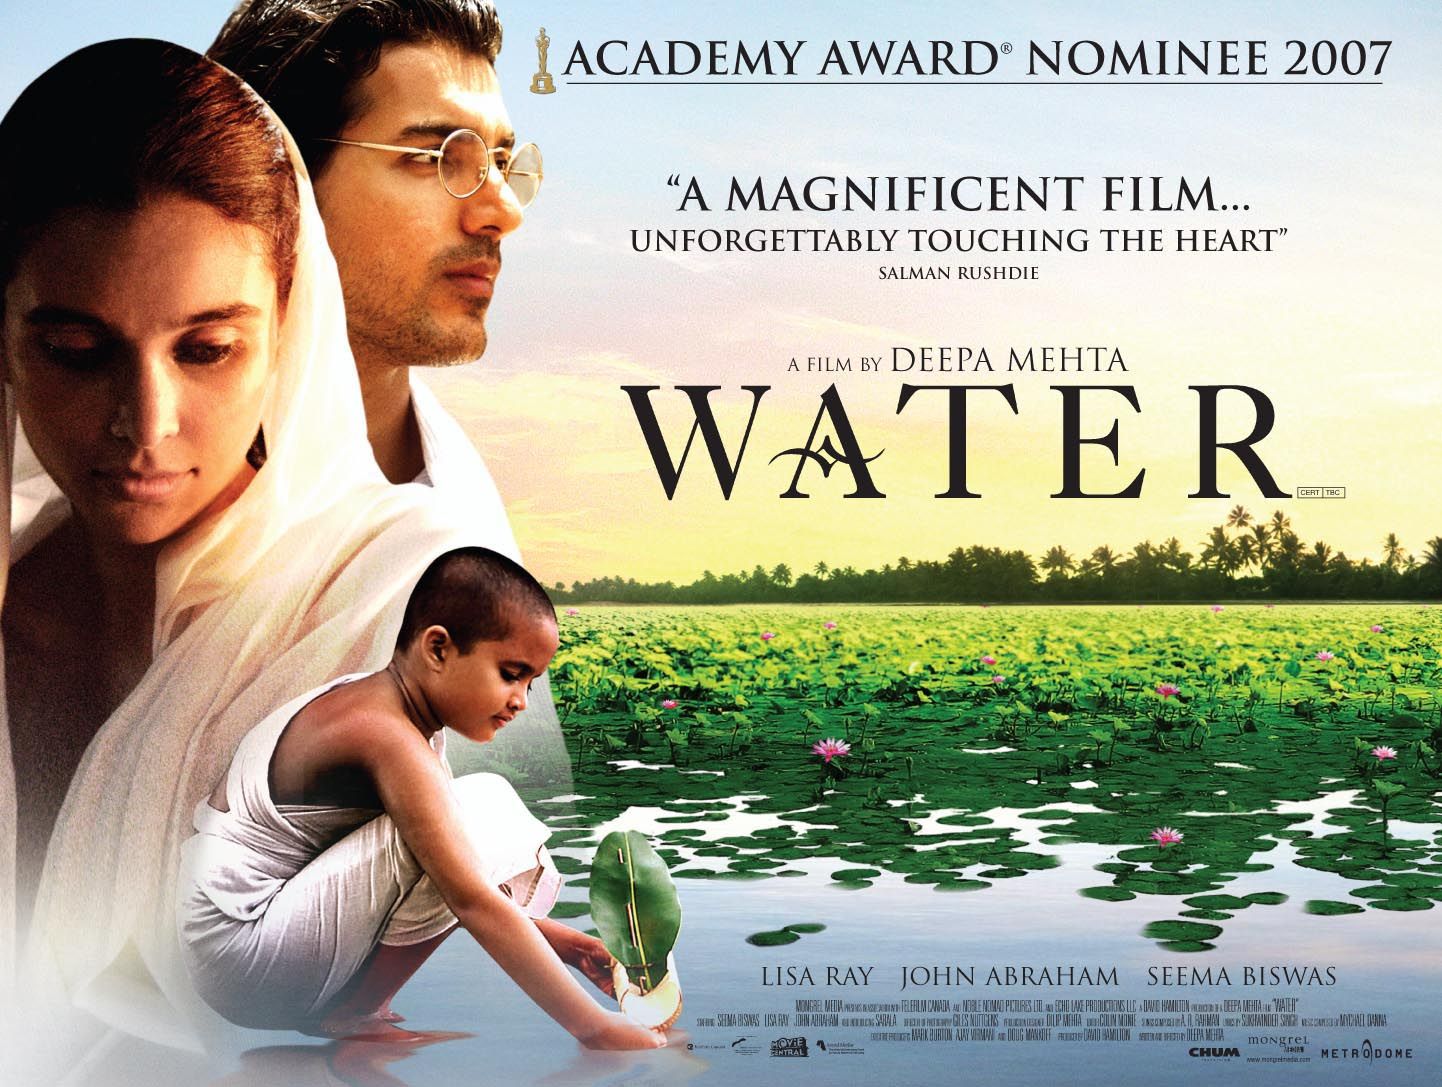 Water (2005)